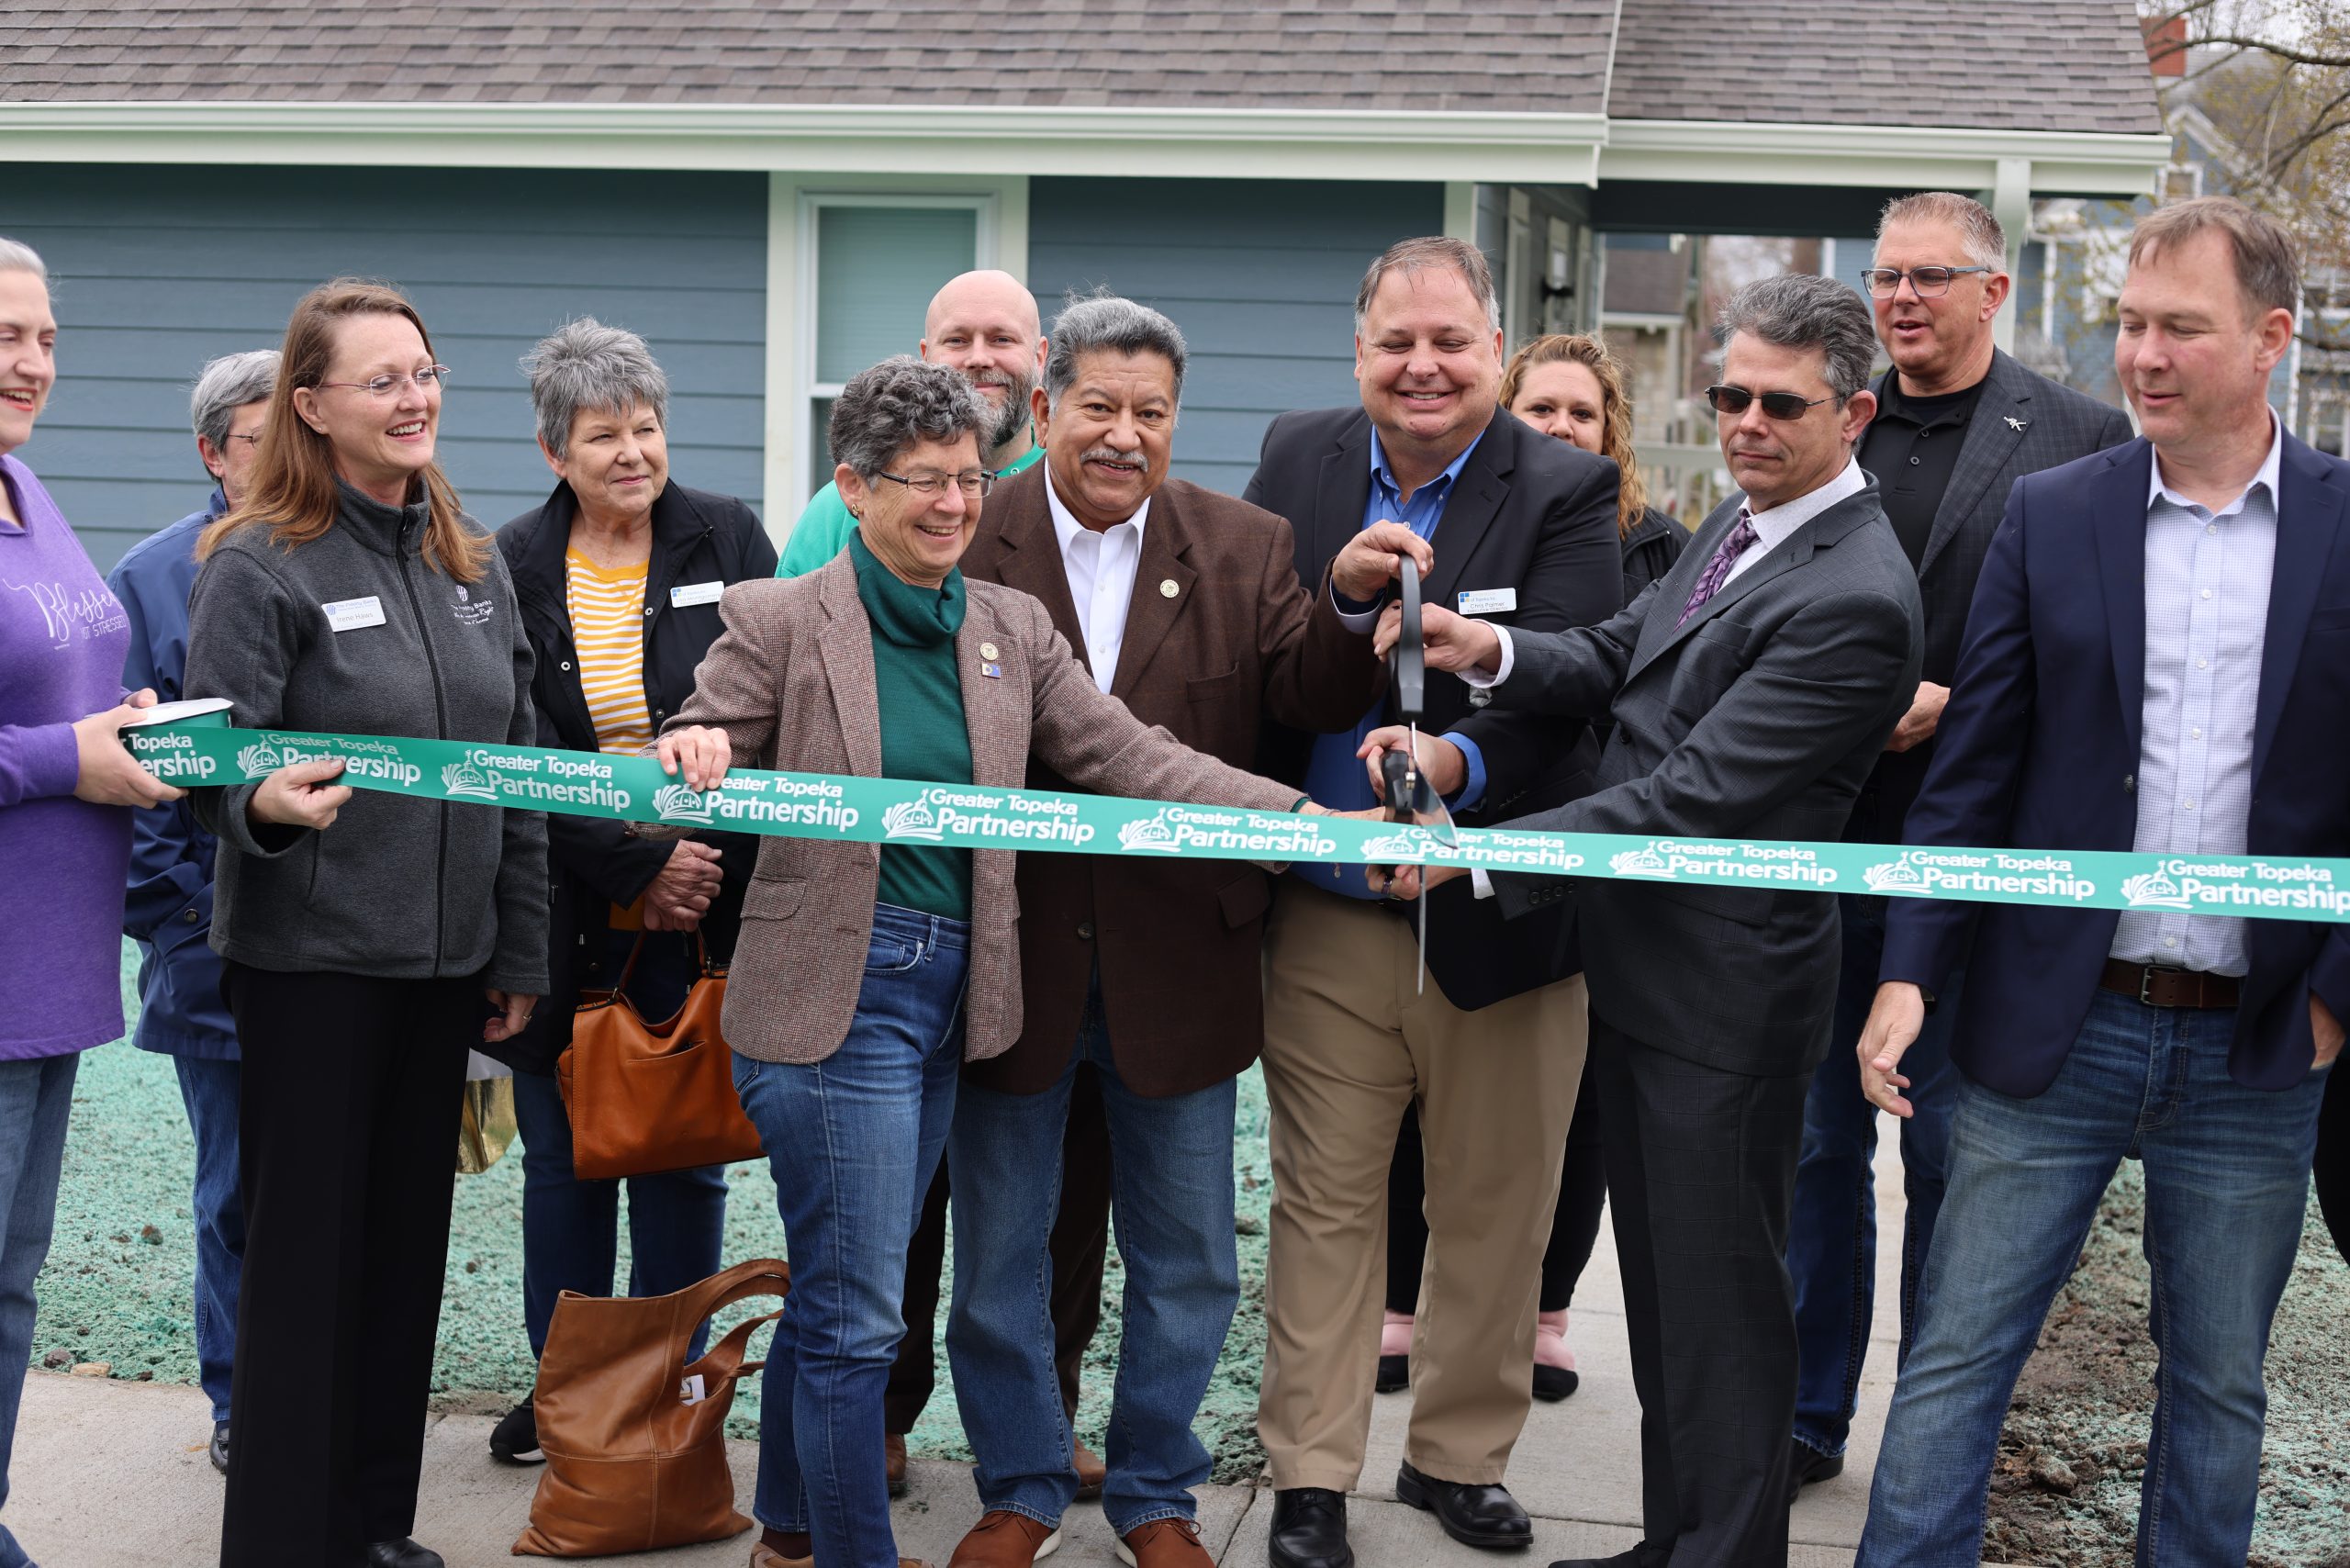 We celebrated the opening of new housing units with Cornerstone of Topeka with a ribbon cutting! Cornerstone has been providing housing and resources to assist individuals and families experiencing homelessness to get back on their feet since 1987.